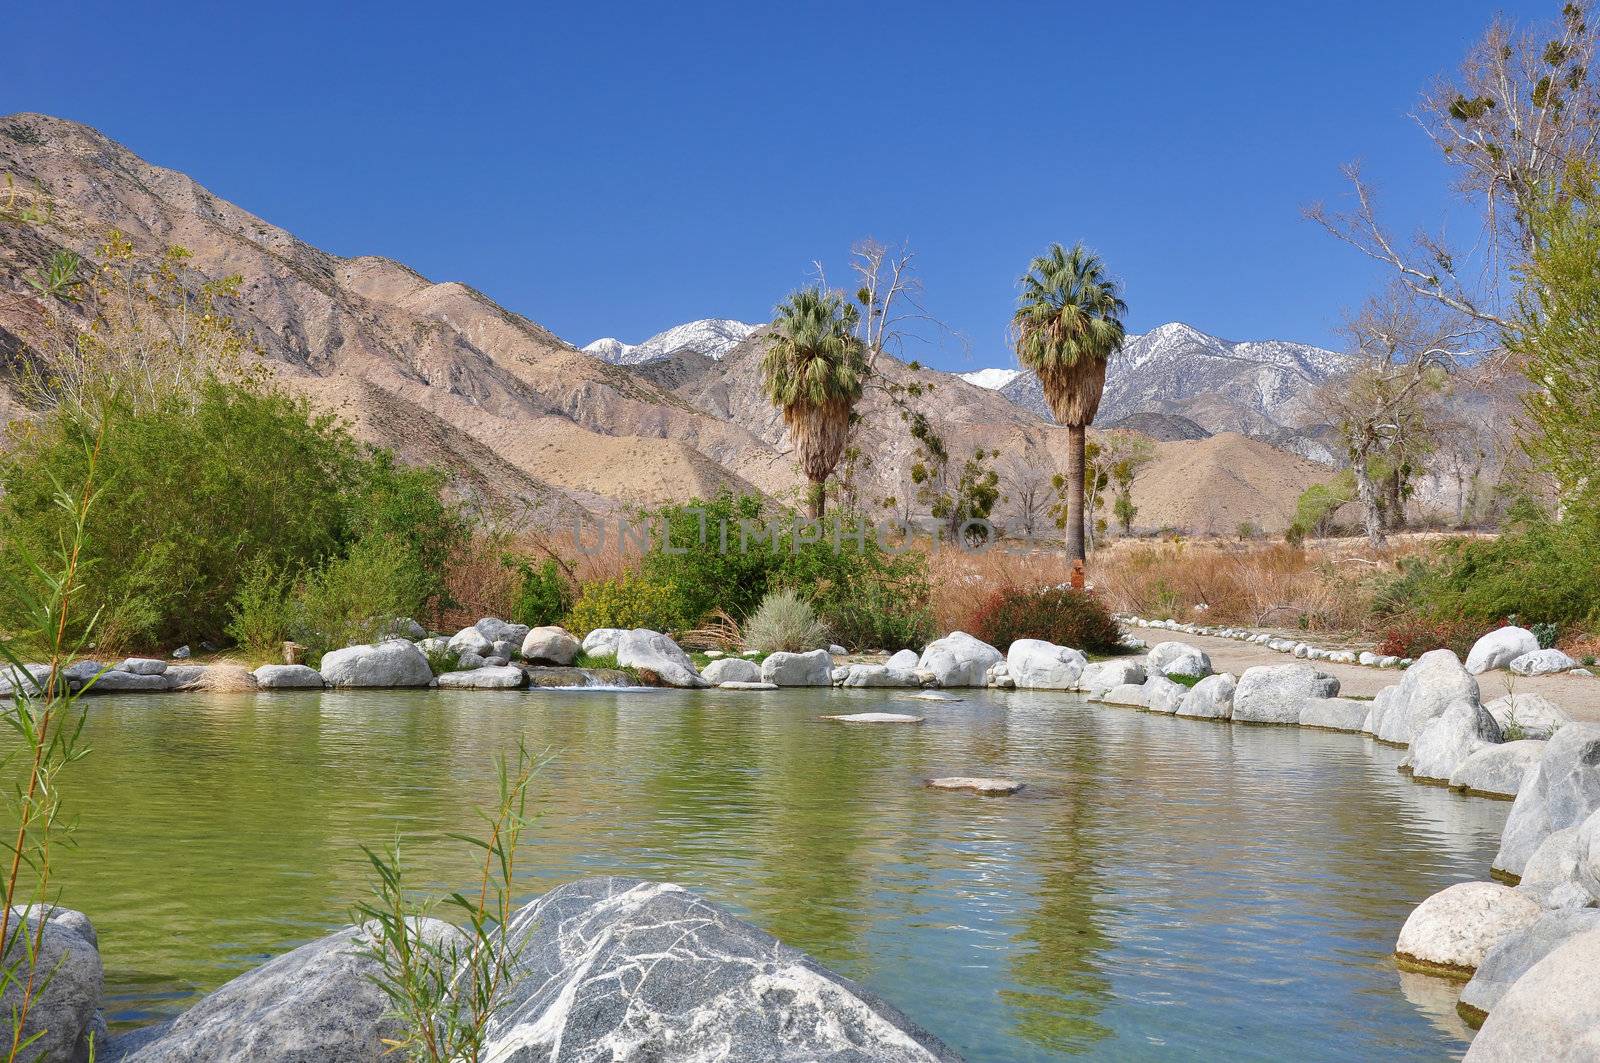 This pond is an oasis in the arid desert region of Whitewater Canyon near Palm Springs, California.